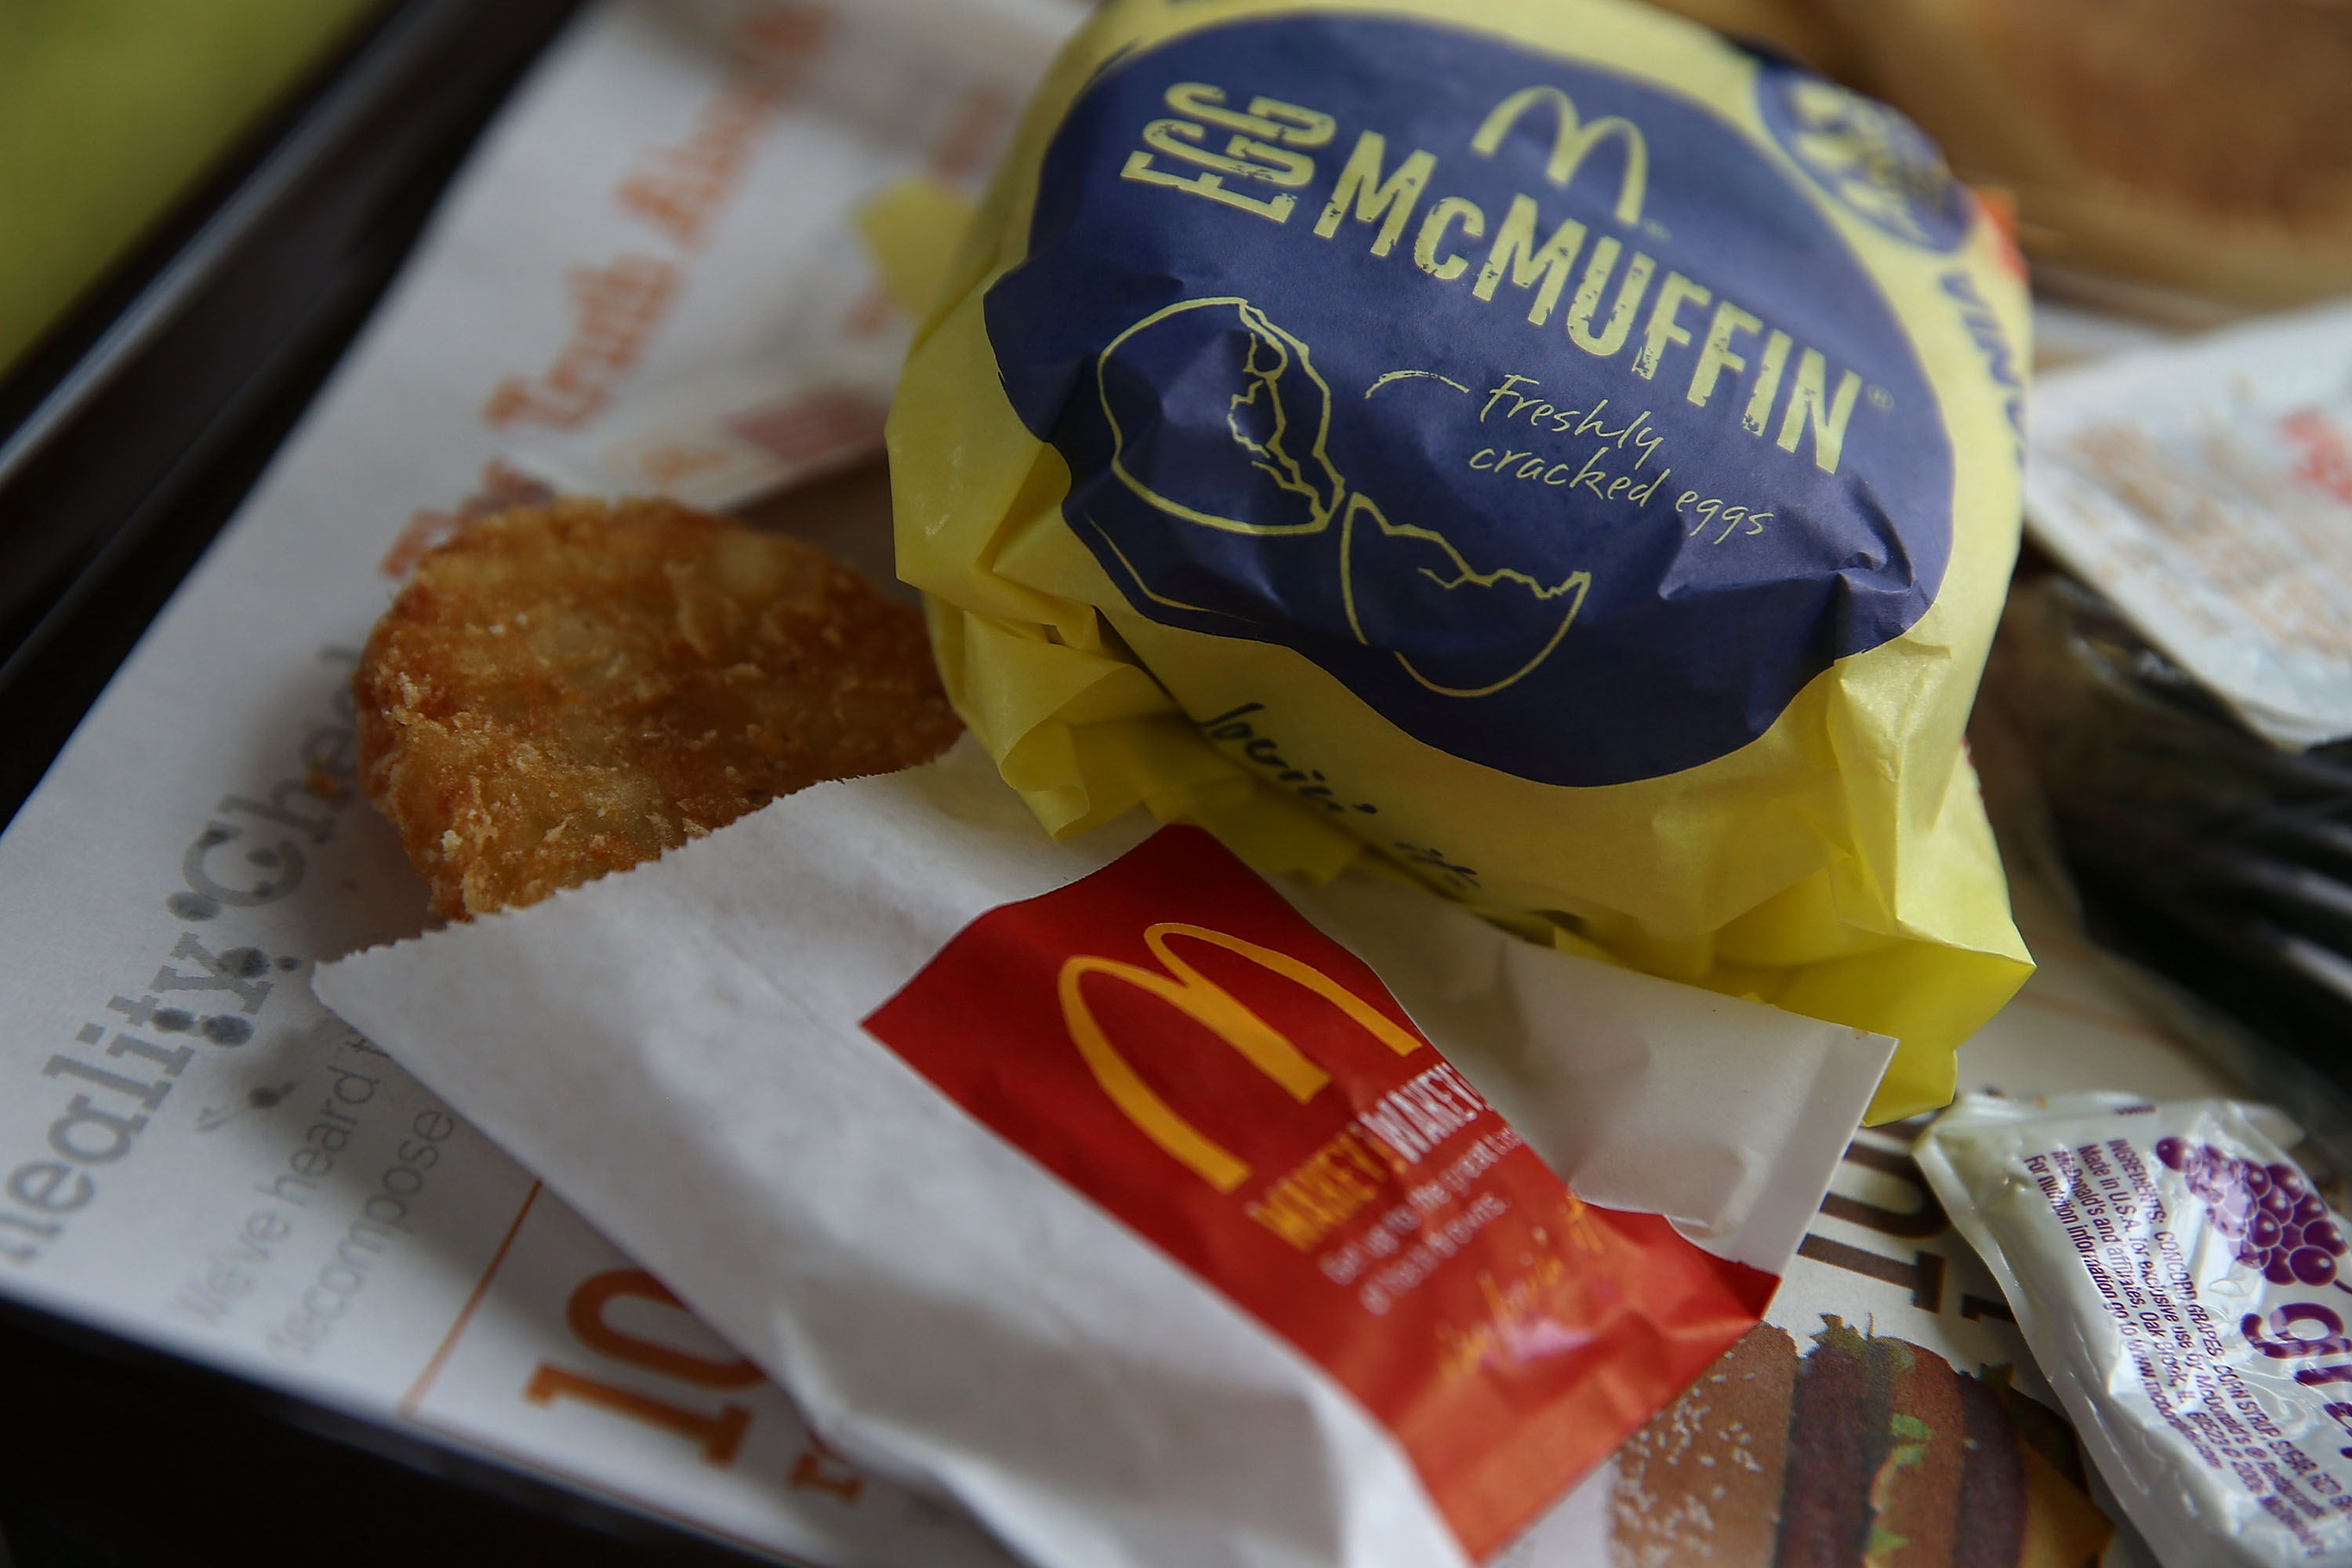 A McDonald's Egg McMuffin and hash browns are displayed at a McDonald's restaurant on July 23, 2015 in Fairfield, California. (Justin Sullivan—Getty Images)